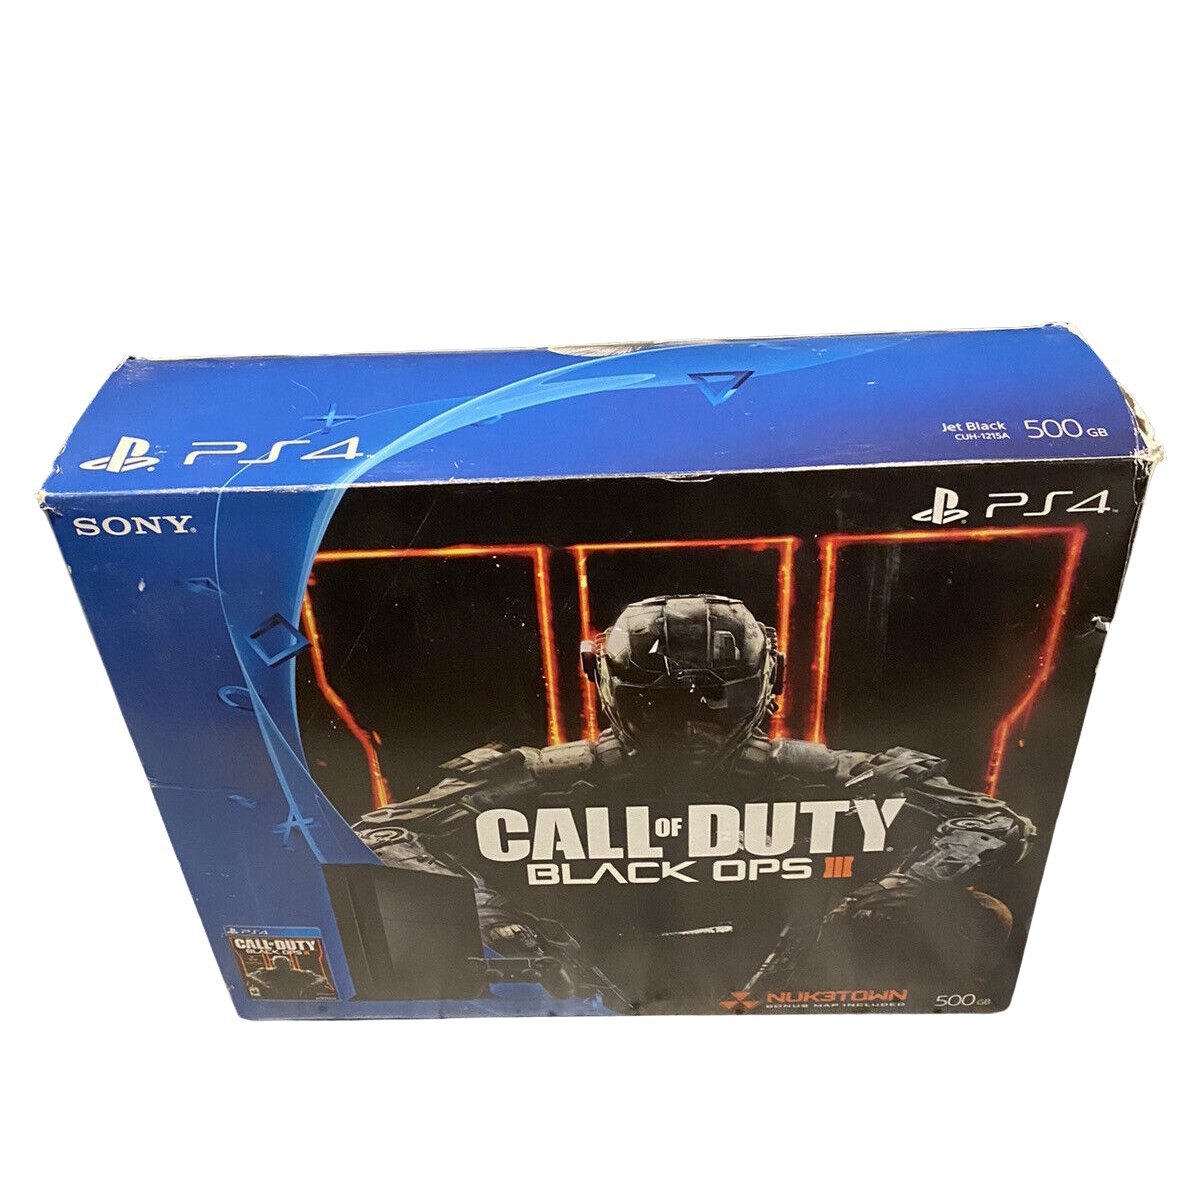 Sony PlayStation 4 500GB Console - Call of Duty Black Ops III Bundle from 2P Gaming